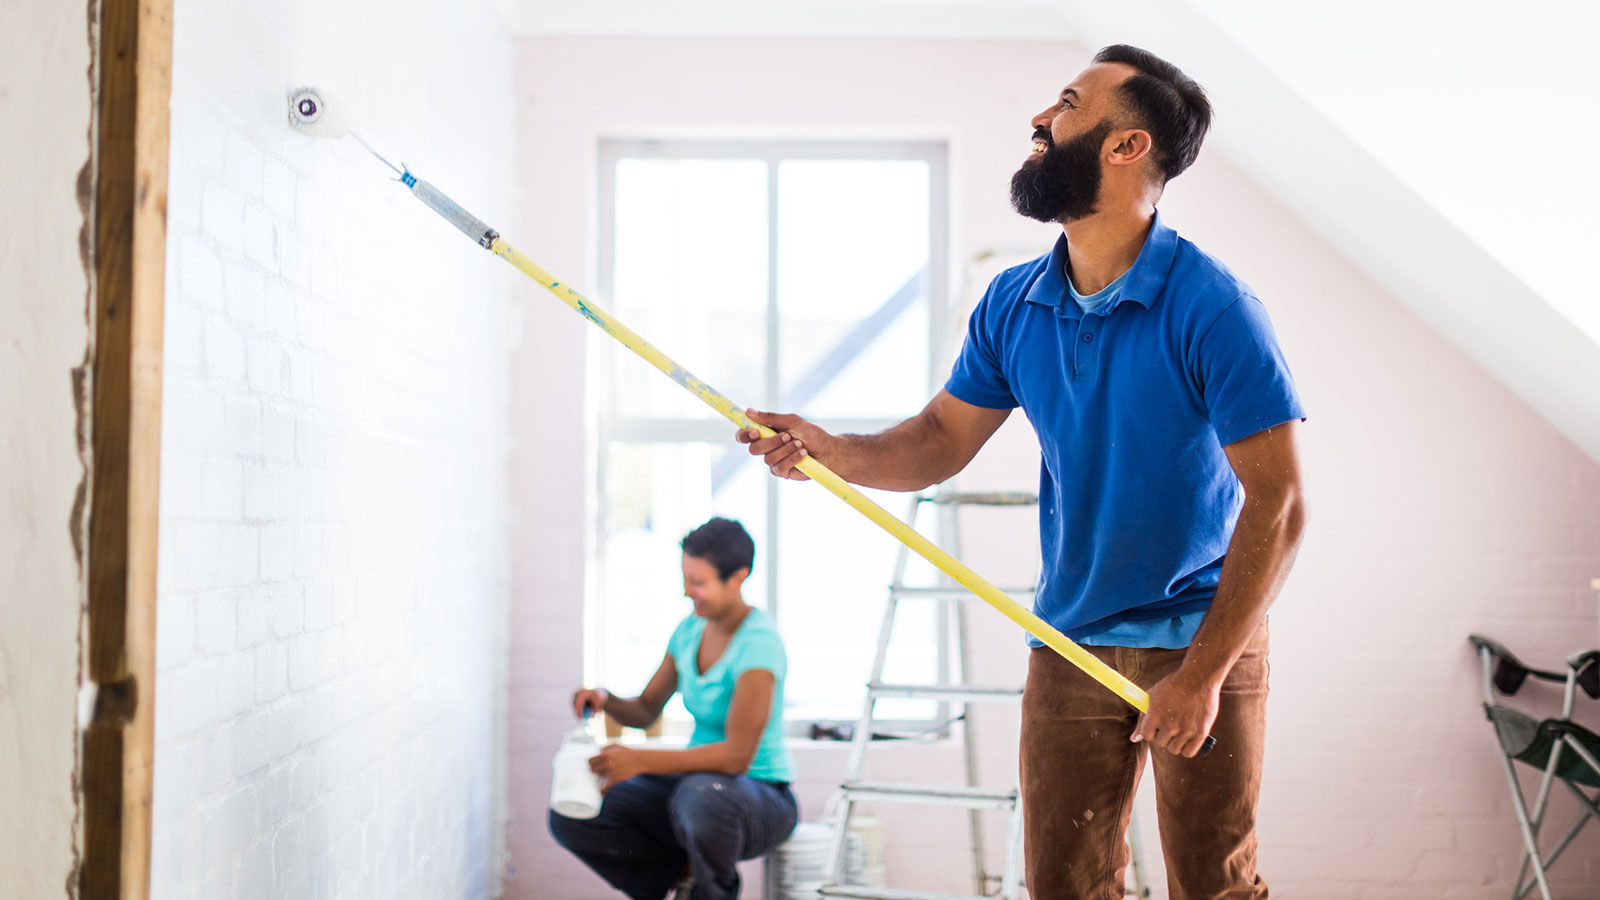 Refinancing to Pay for Home Improvements